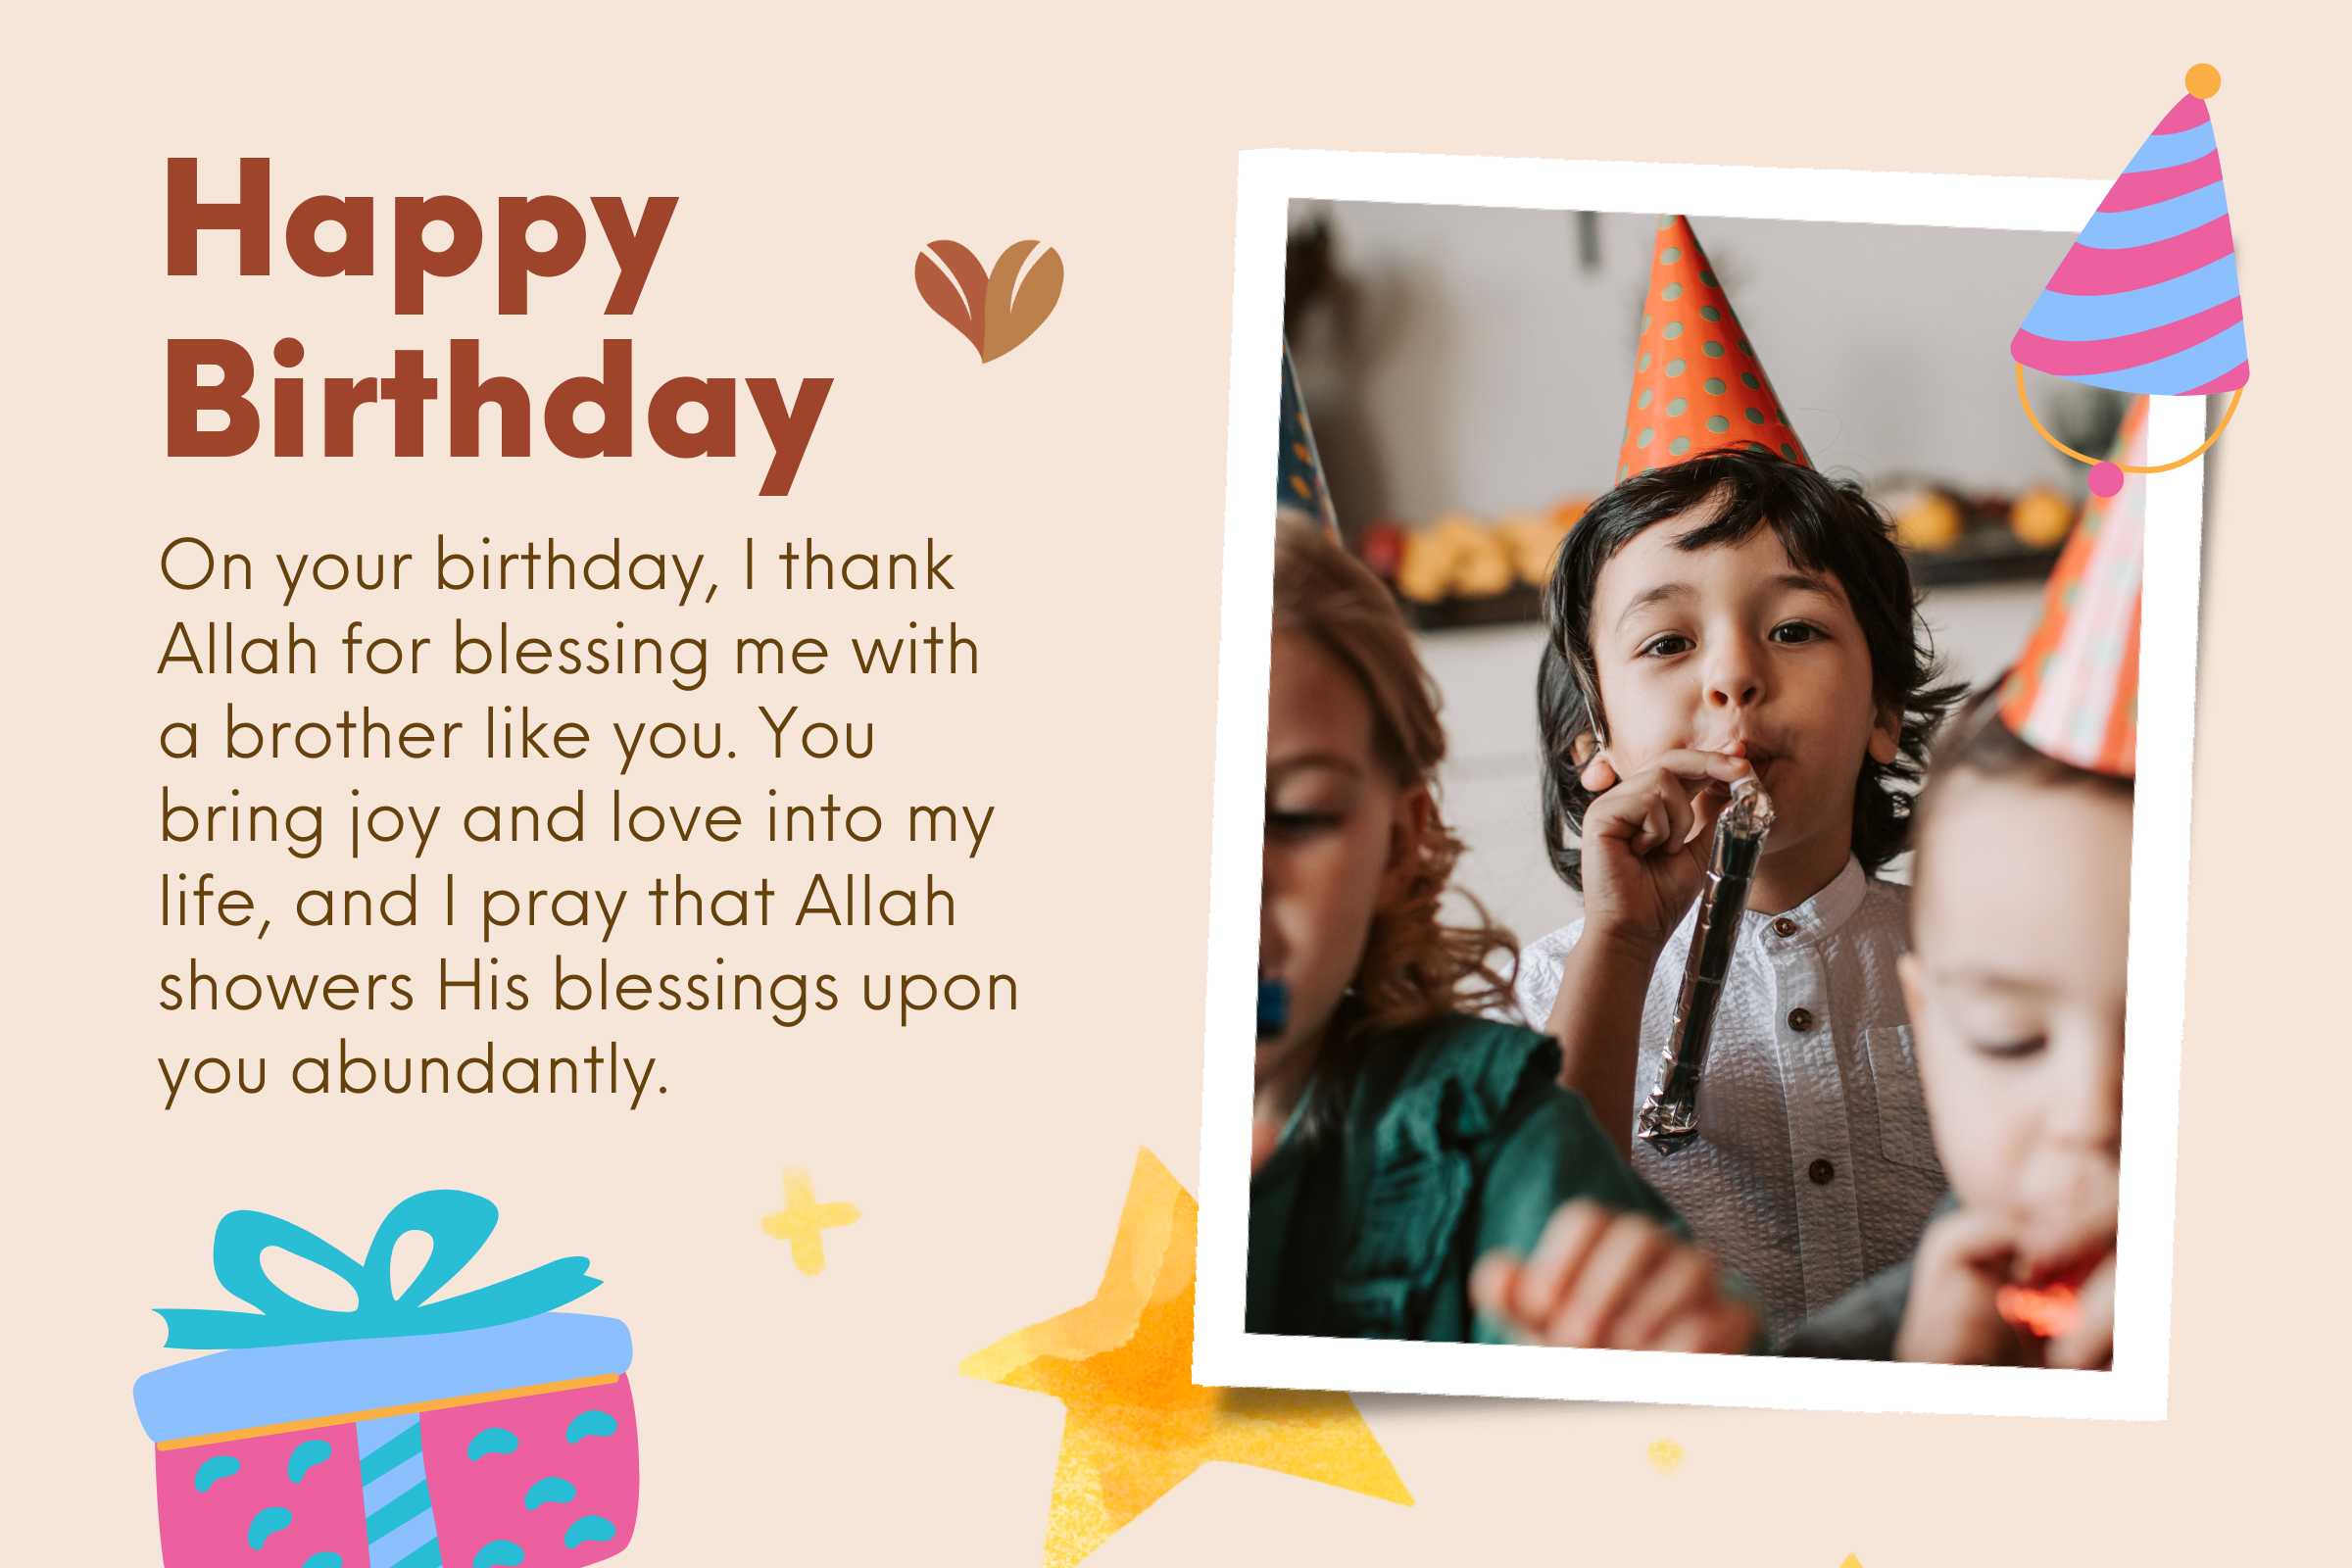 Thank Allah for blessing me with a brother like you - Islamic birthday wishes for brother